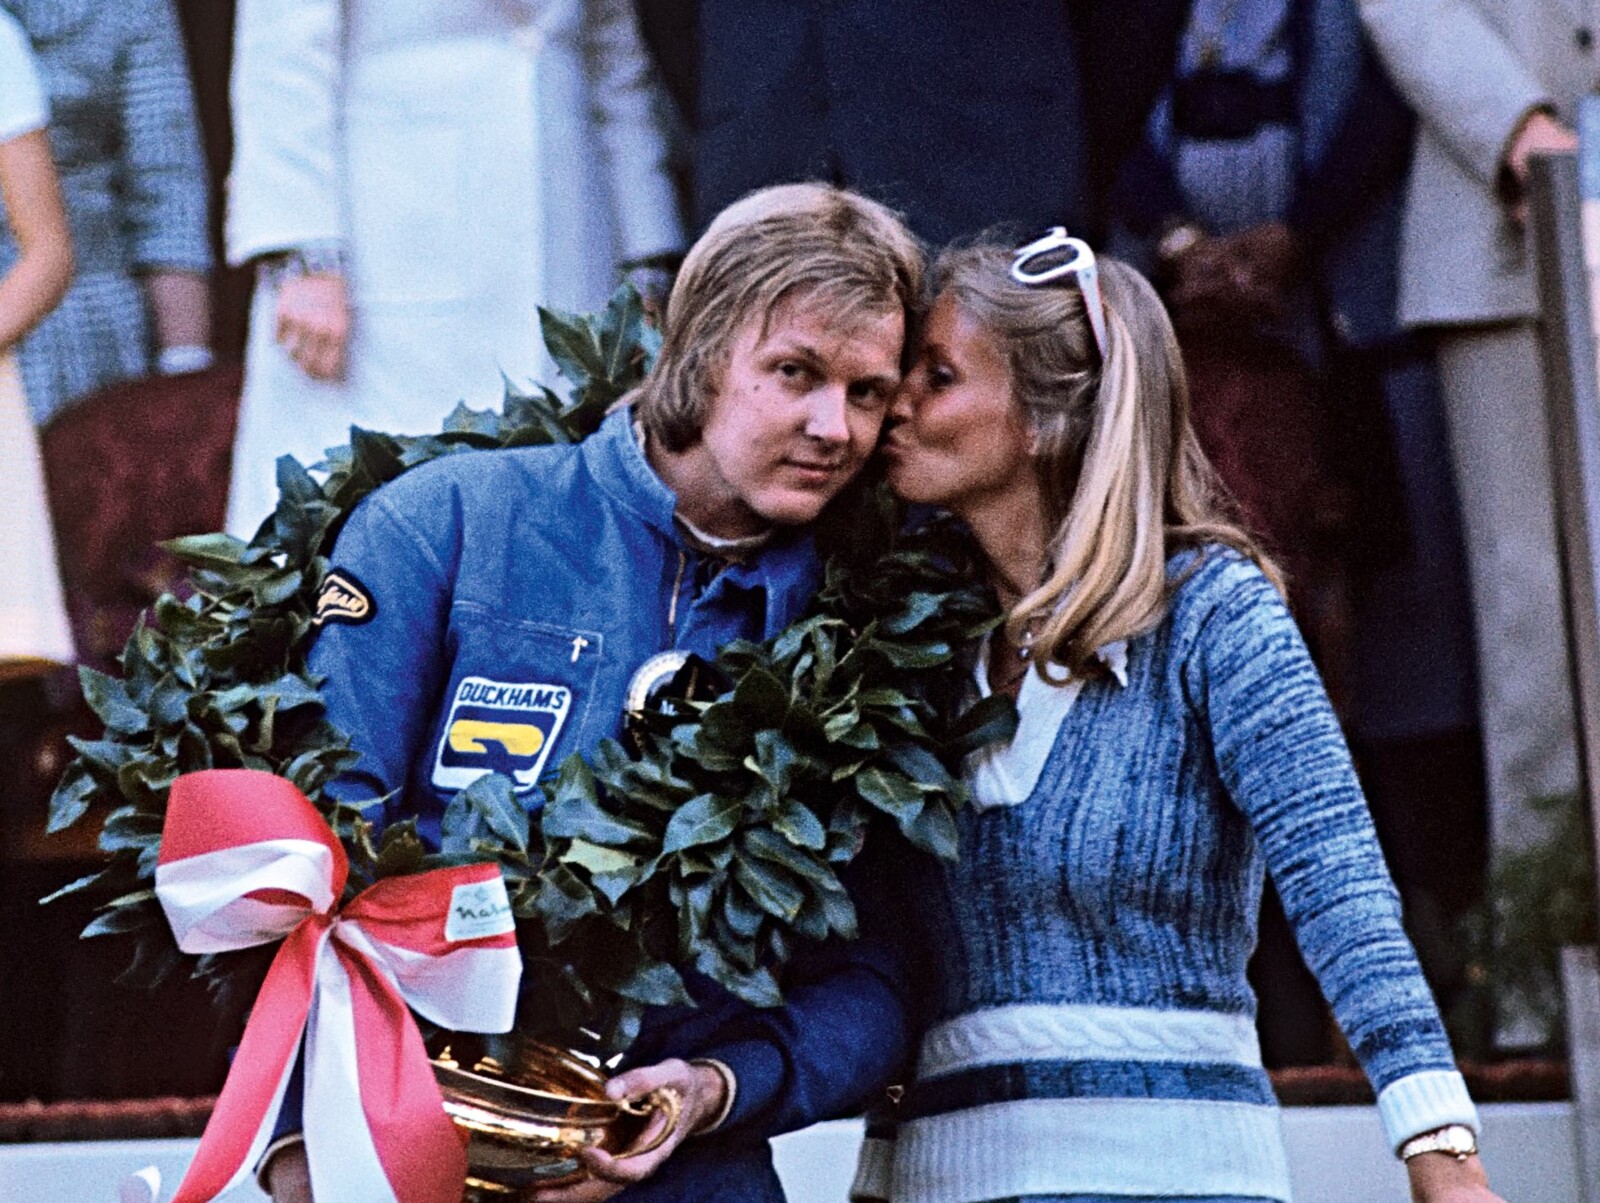 Ronnie Peterson and his wife Barbro celebrating victory in the 1974 Monaco Grand Prix.